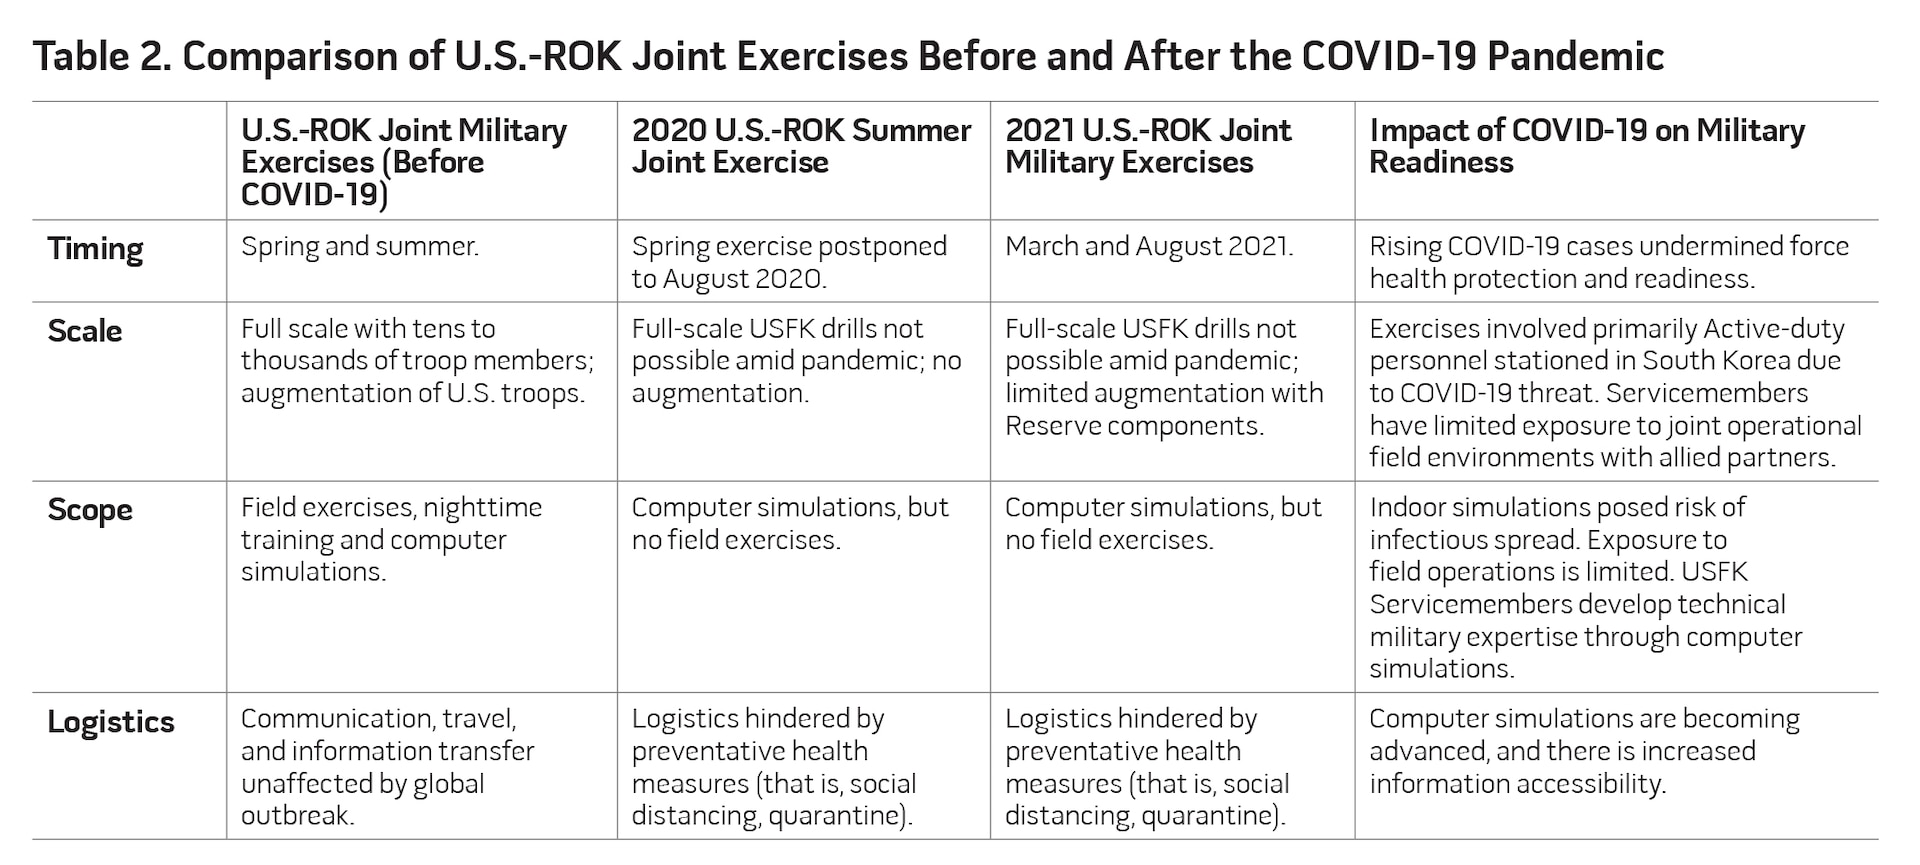 Table 2. Comparison of U.S.-ROK Joint Exercises Before and After the COVID-19 Pandemic